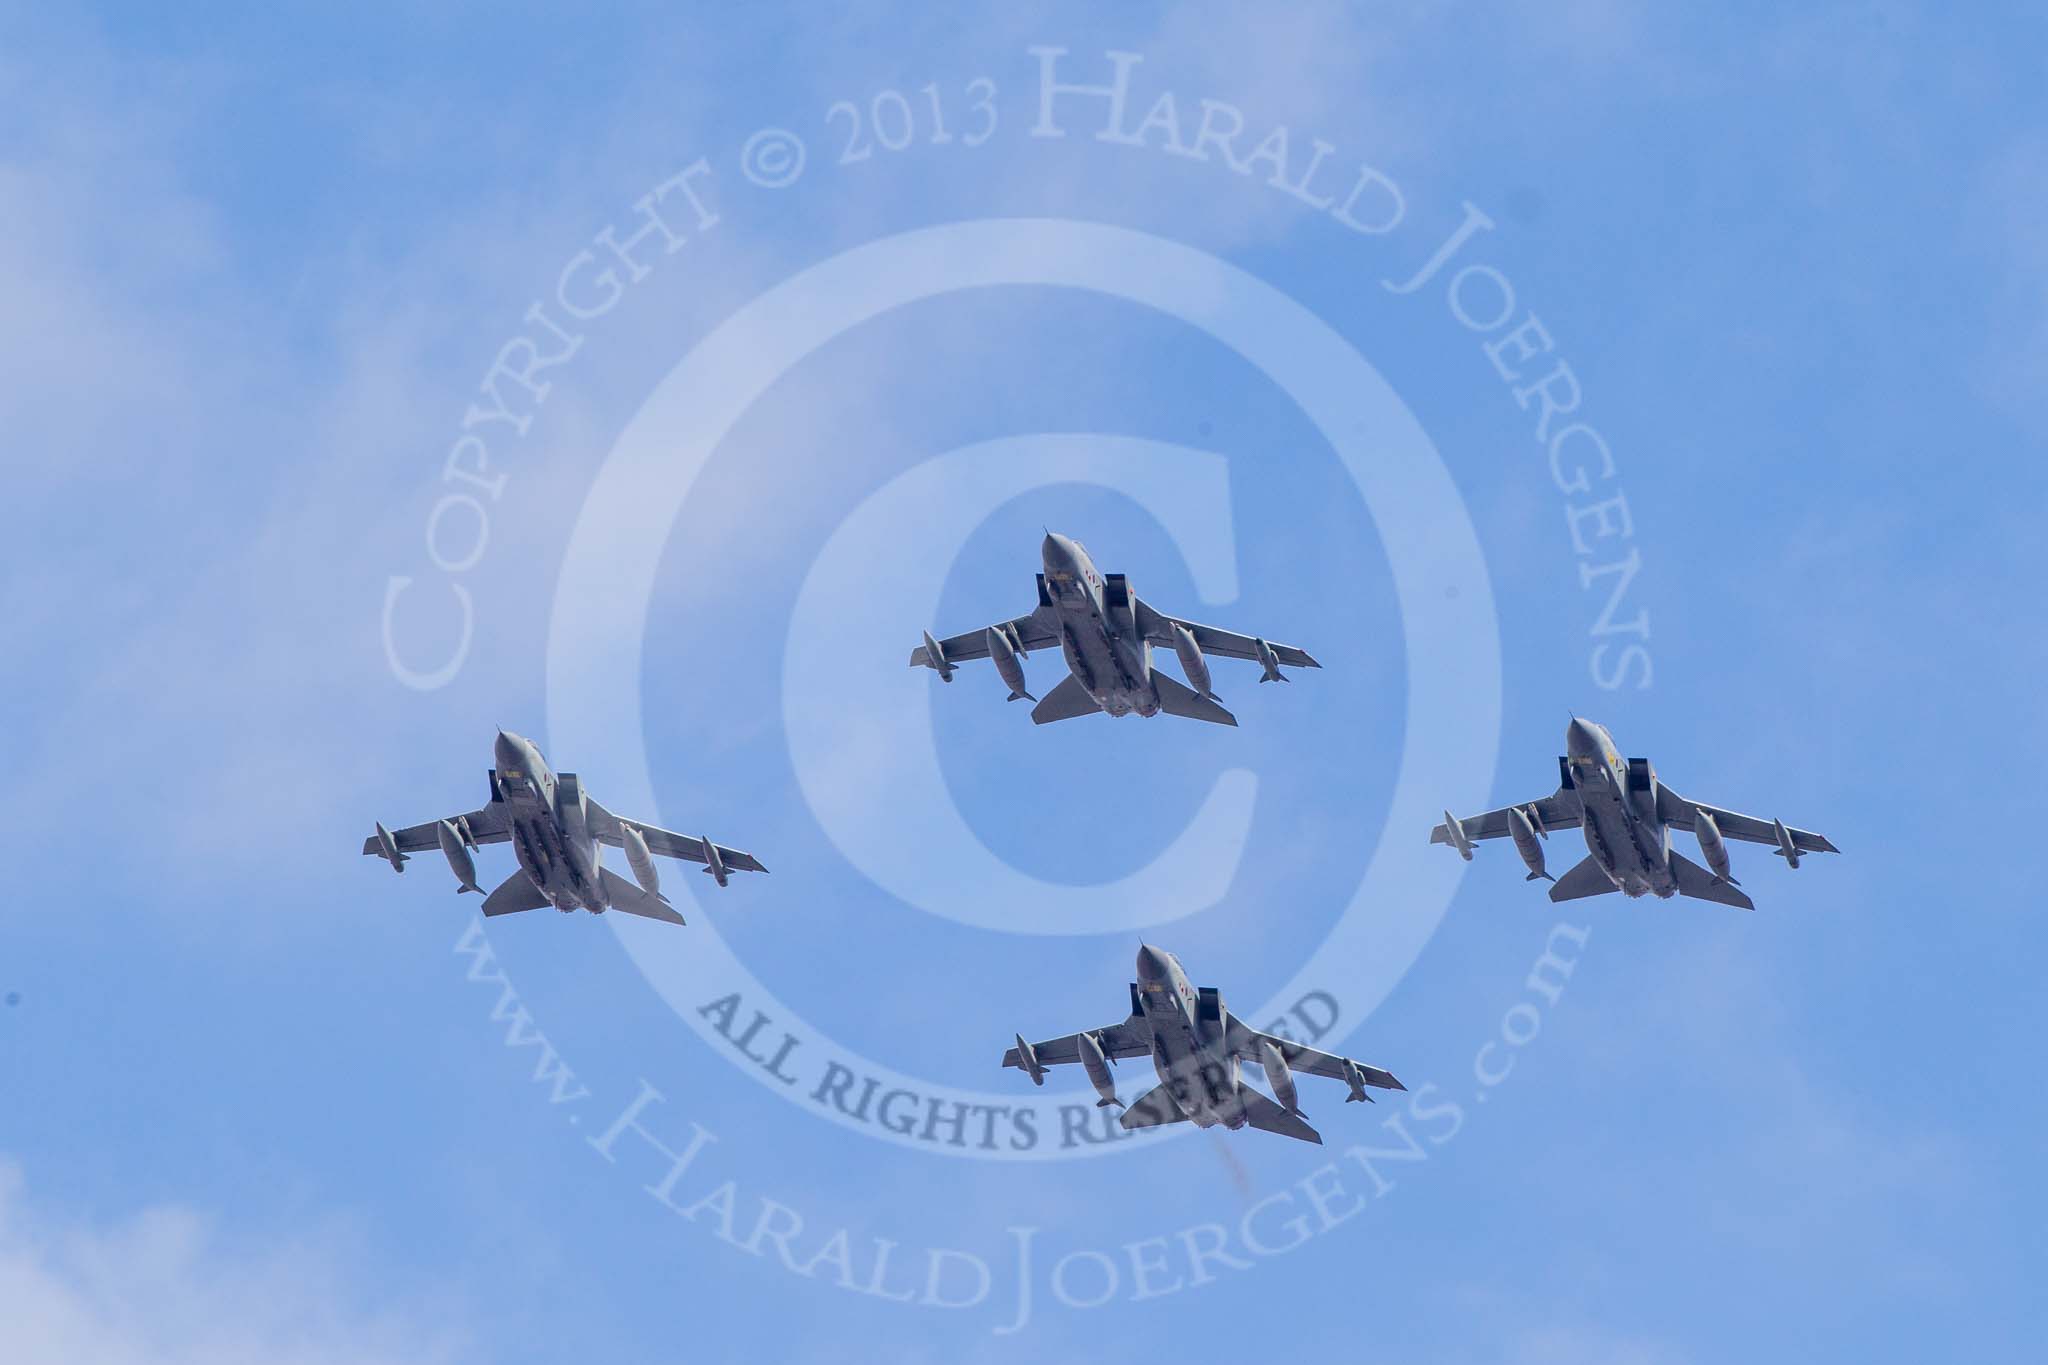 Trooping the Colour 2013: The RAF Flypast - four Tornado GR4 in a diamond formation. Image #894, 15 June 2013 13:00 Horse Guards Parade, London, UK